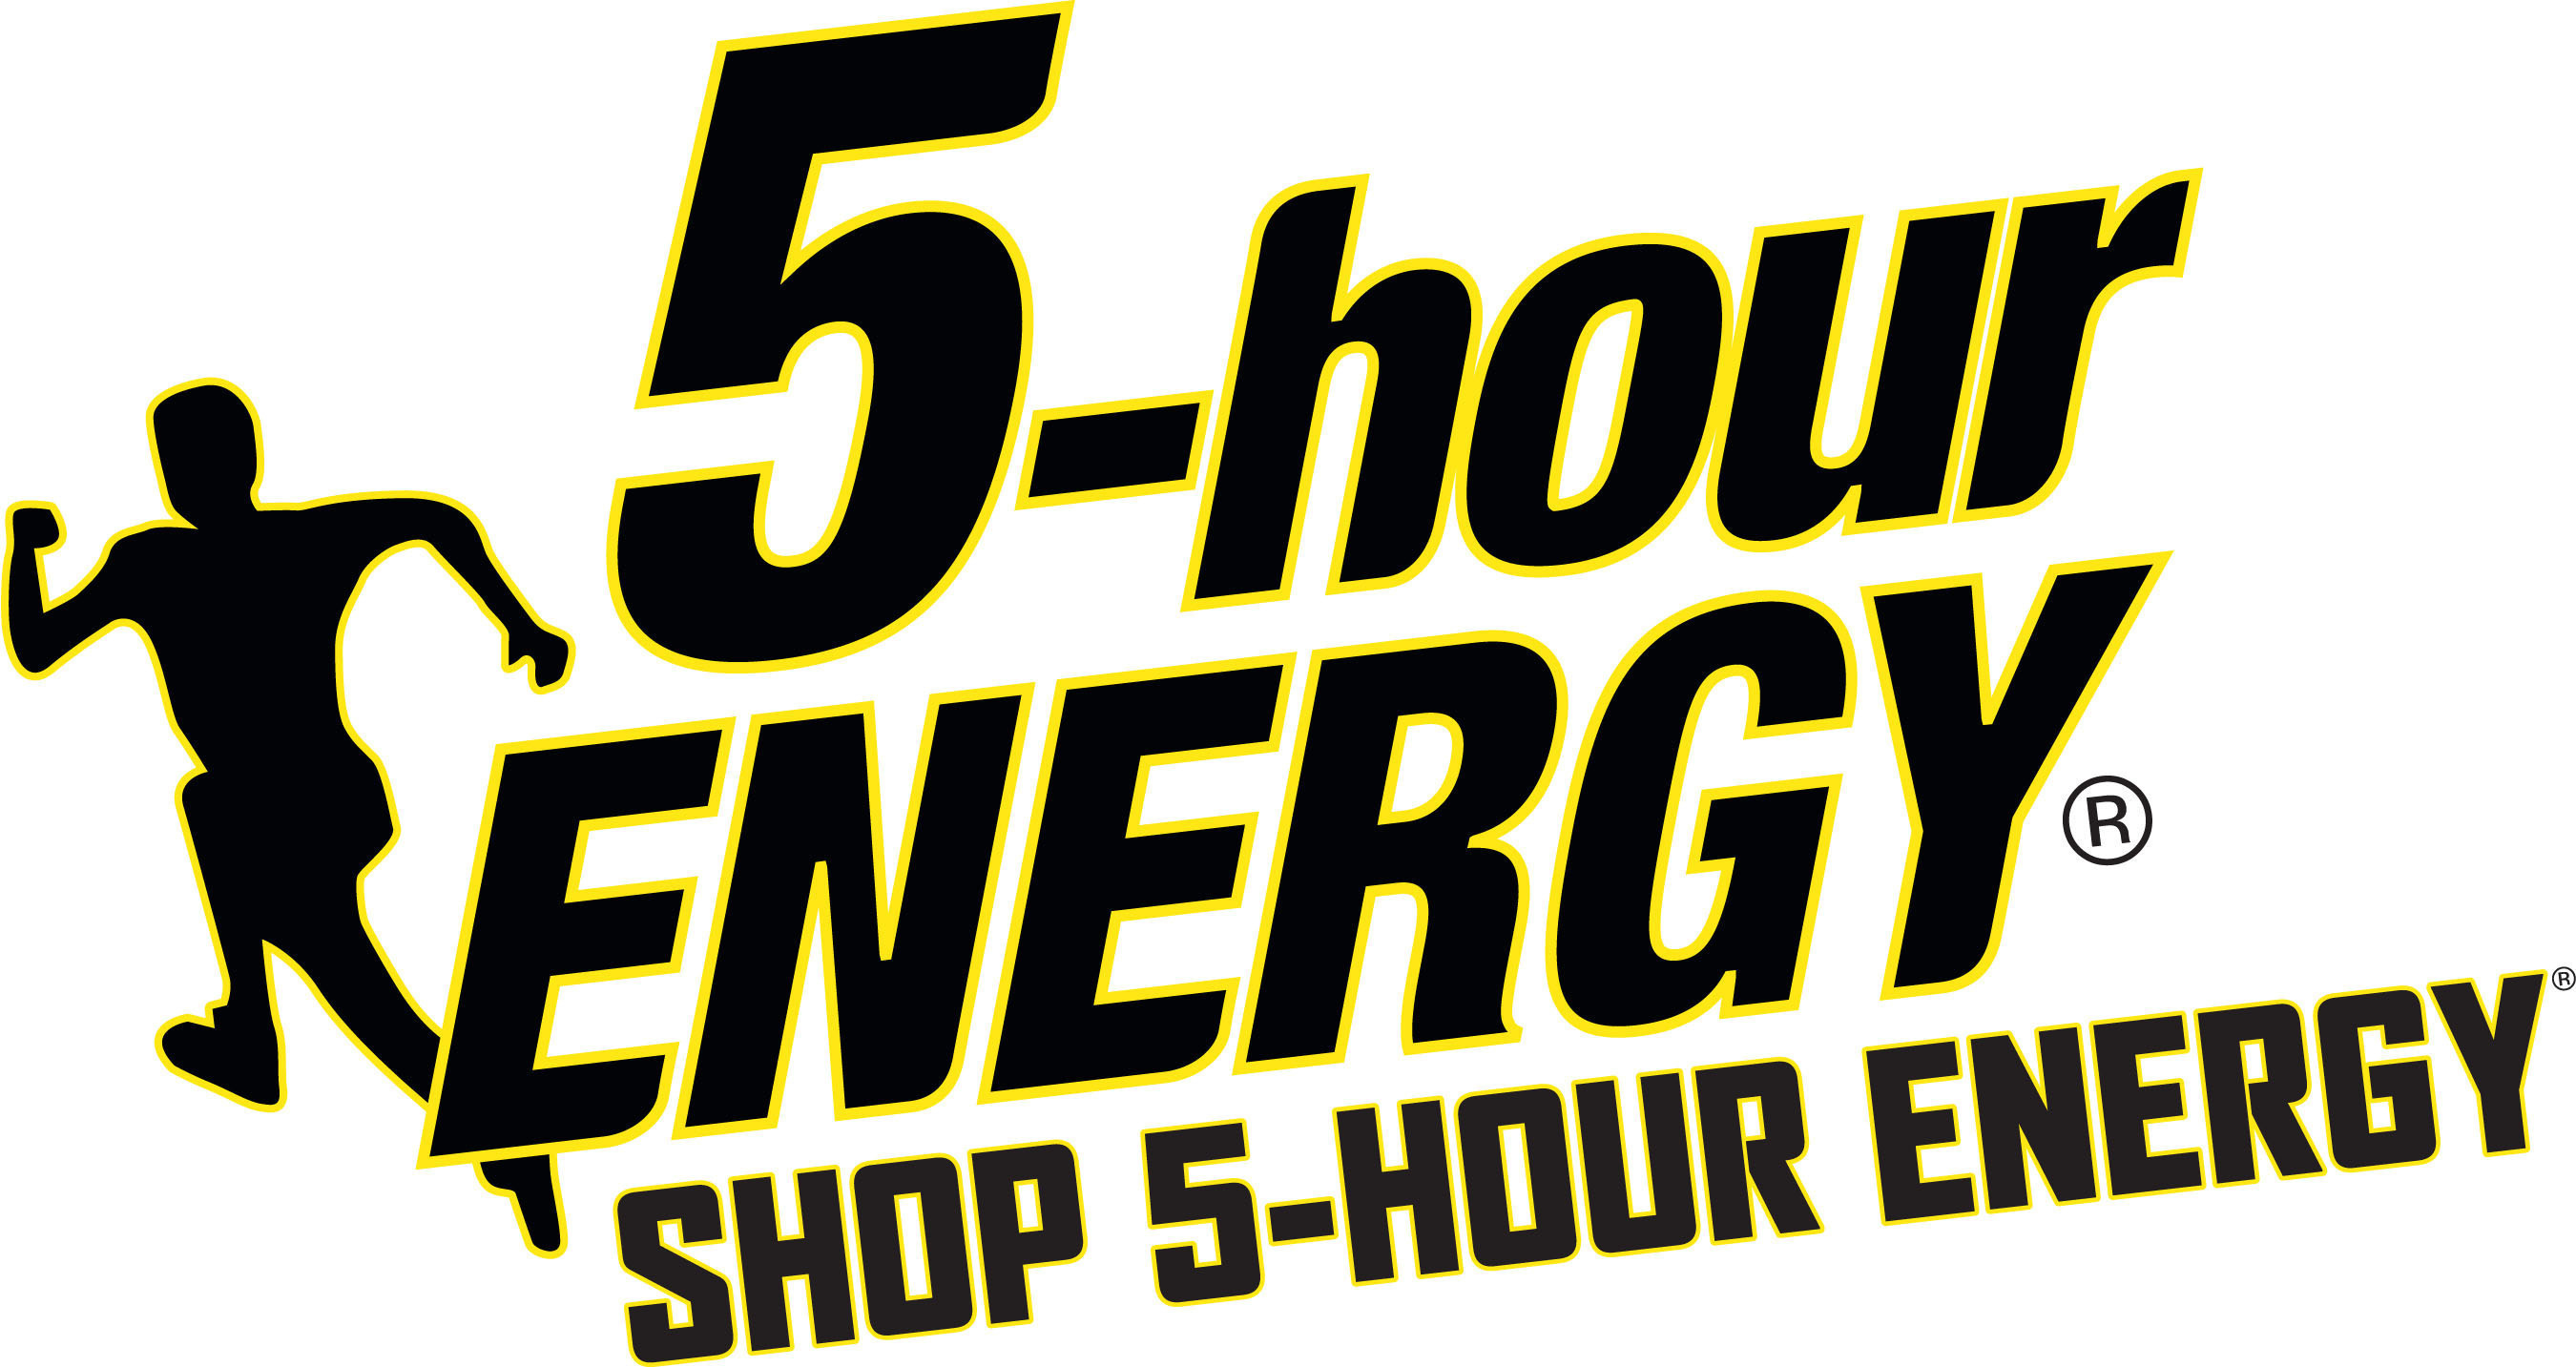 Shop5HourEnergy offers auto delivery, monthly promotions, limited edition flavors and gear. Now Available with the Click of a Button